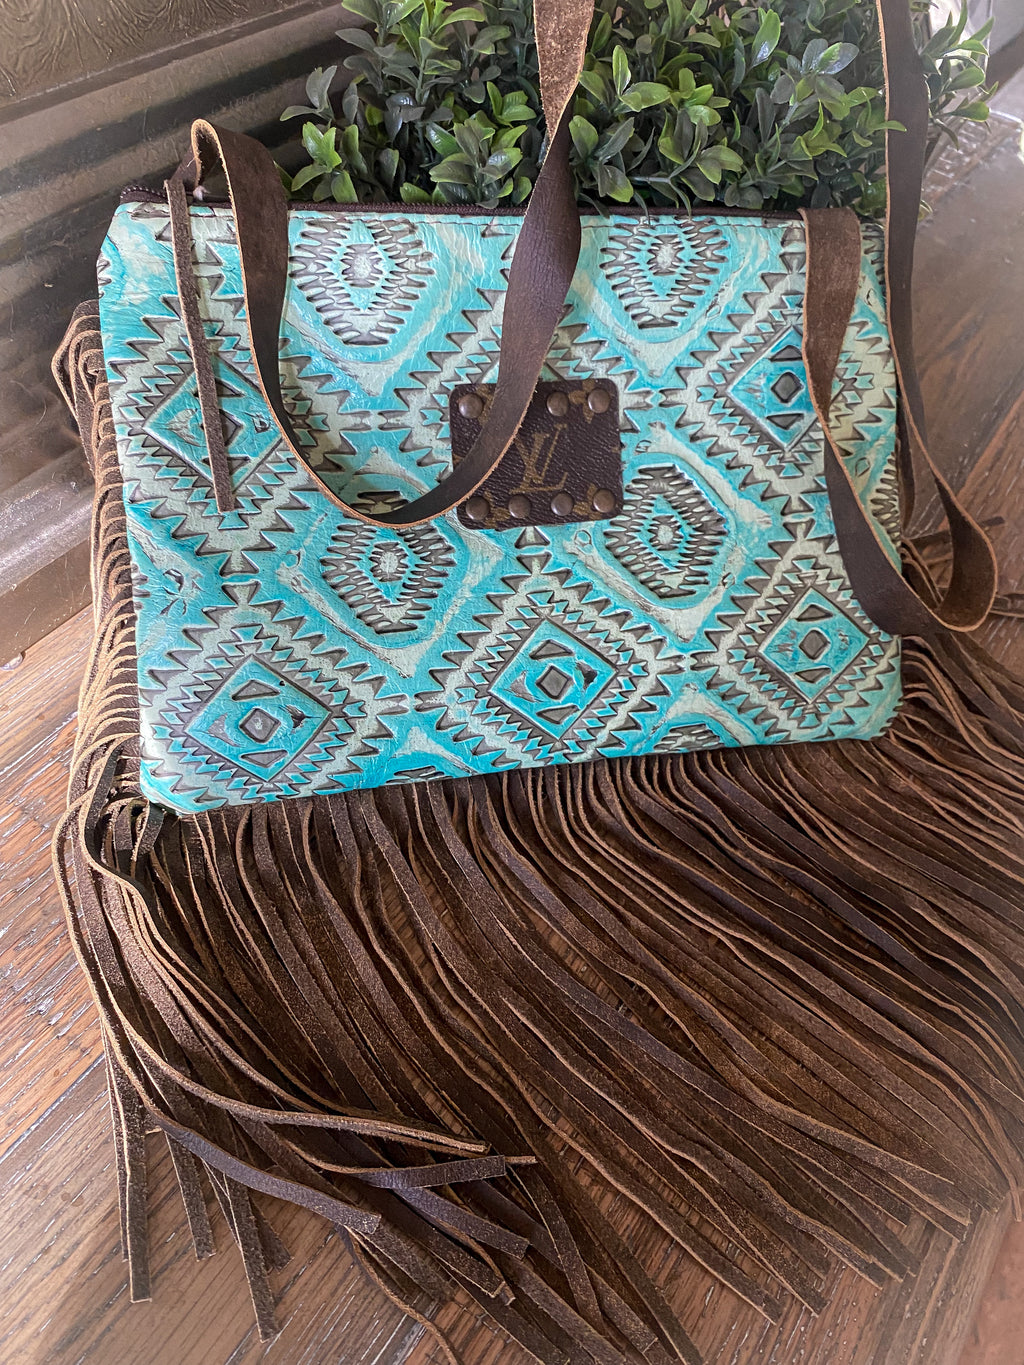 Keep It Gypsy Products – Rustic Mile Boutique